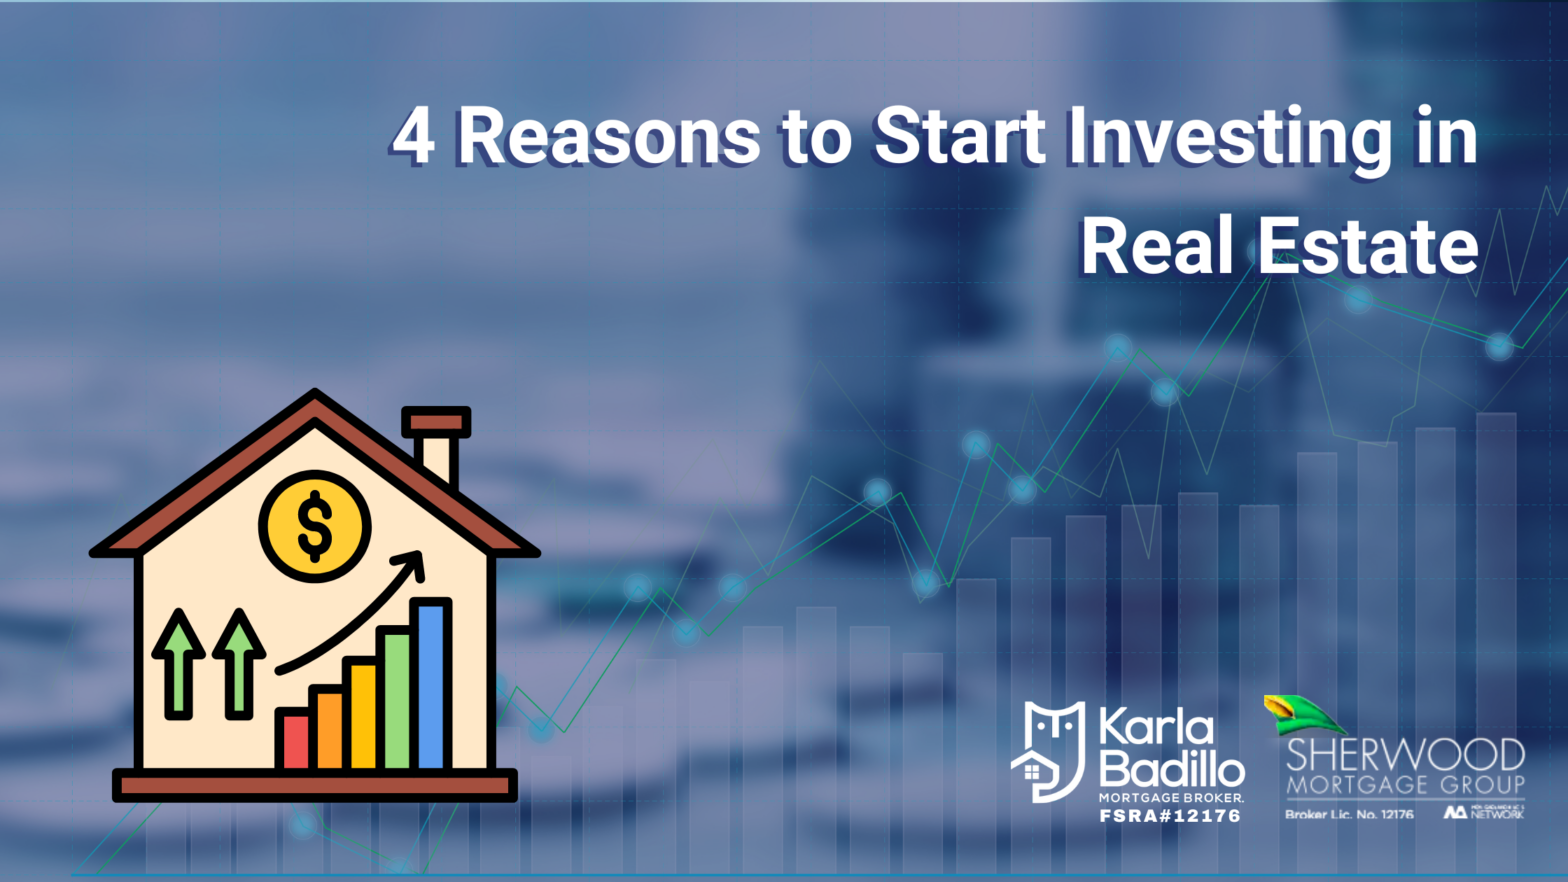 4 Reasons to Start Investing in Real Estate